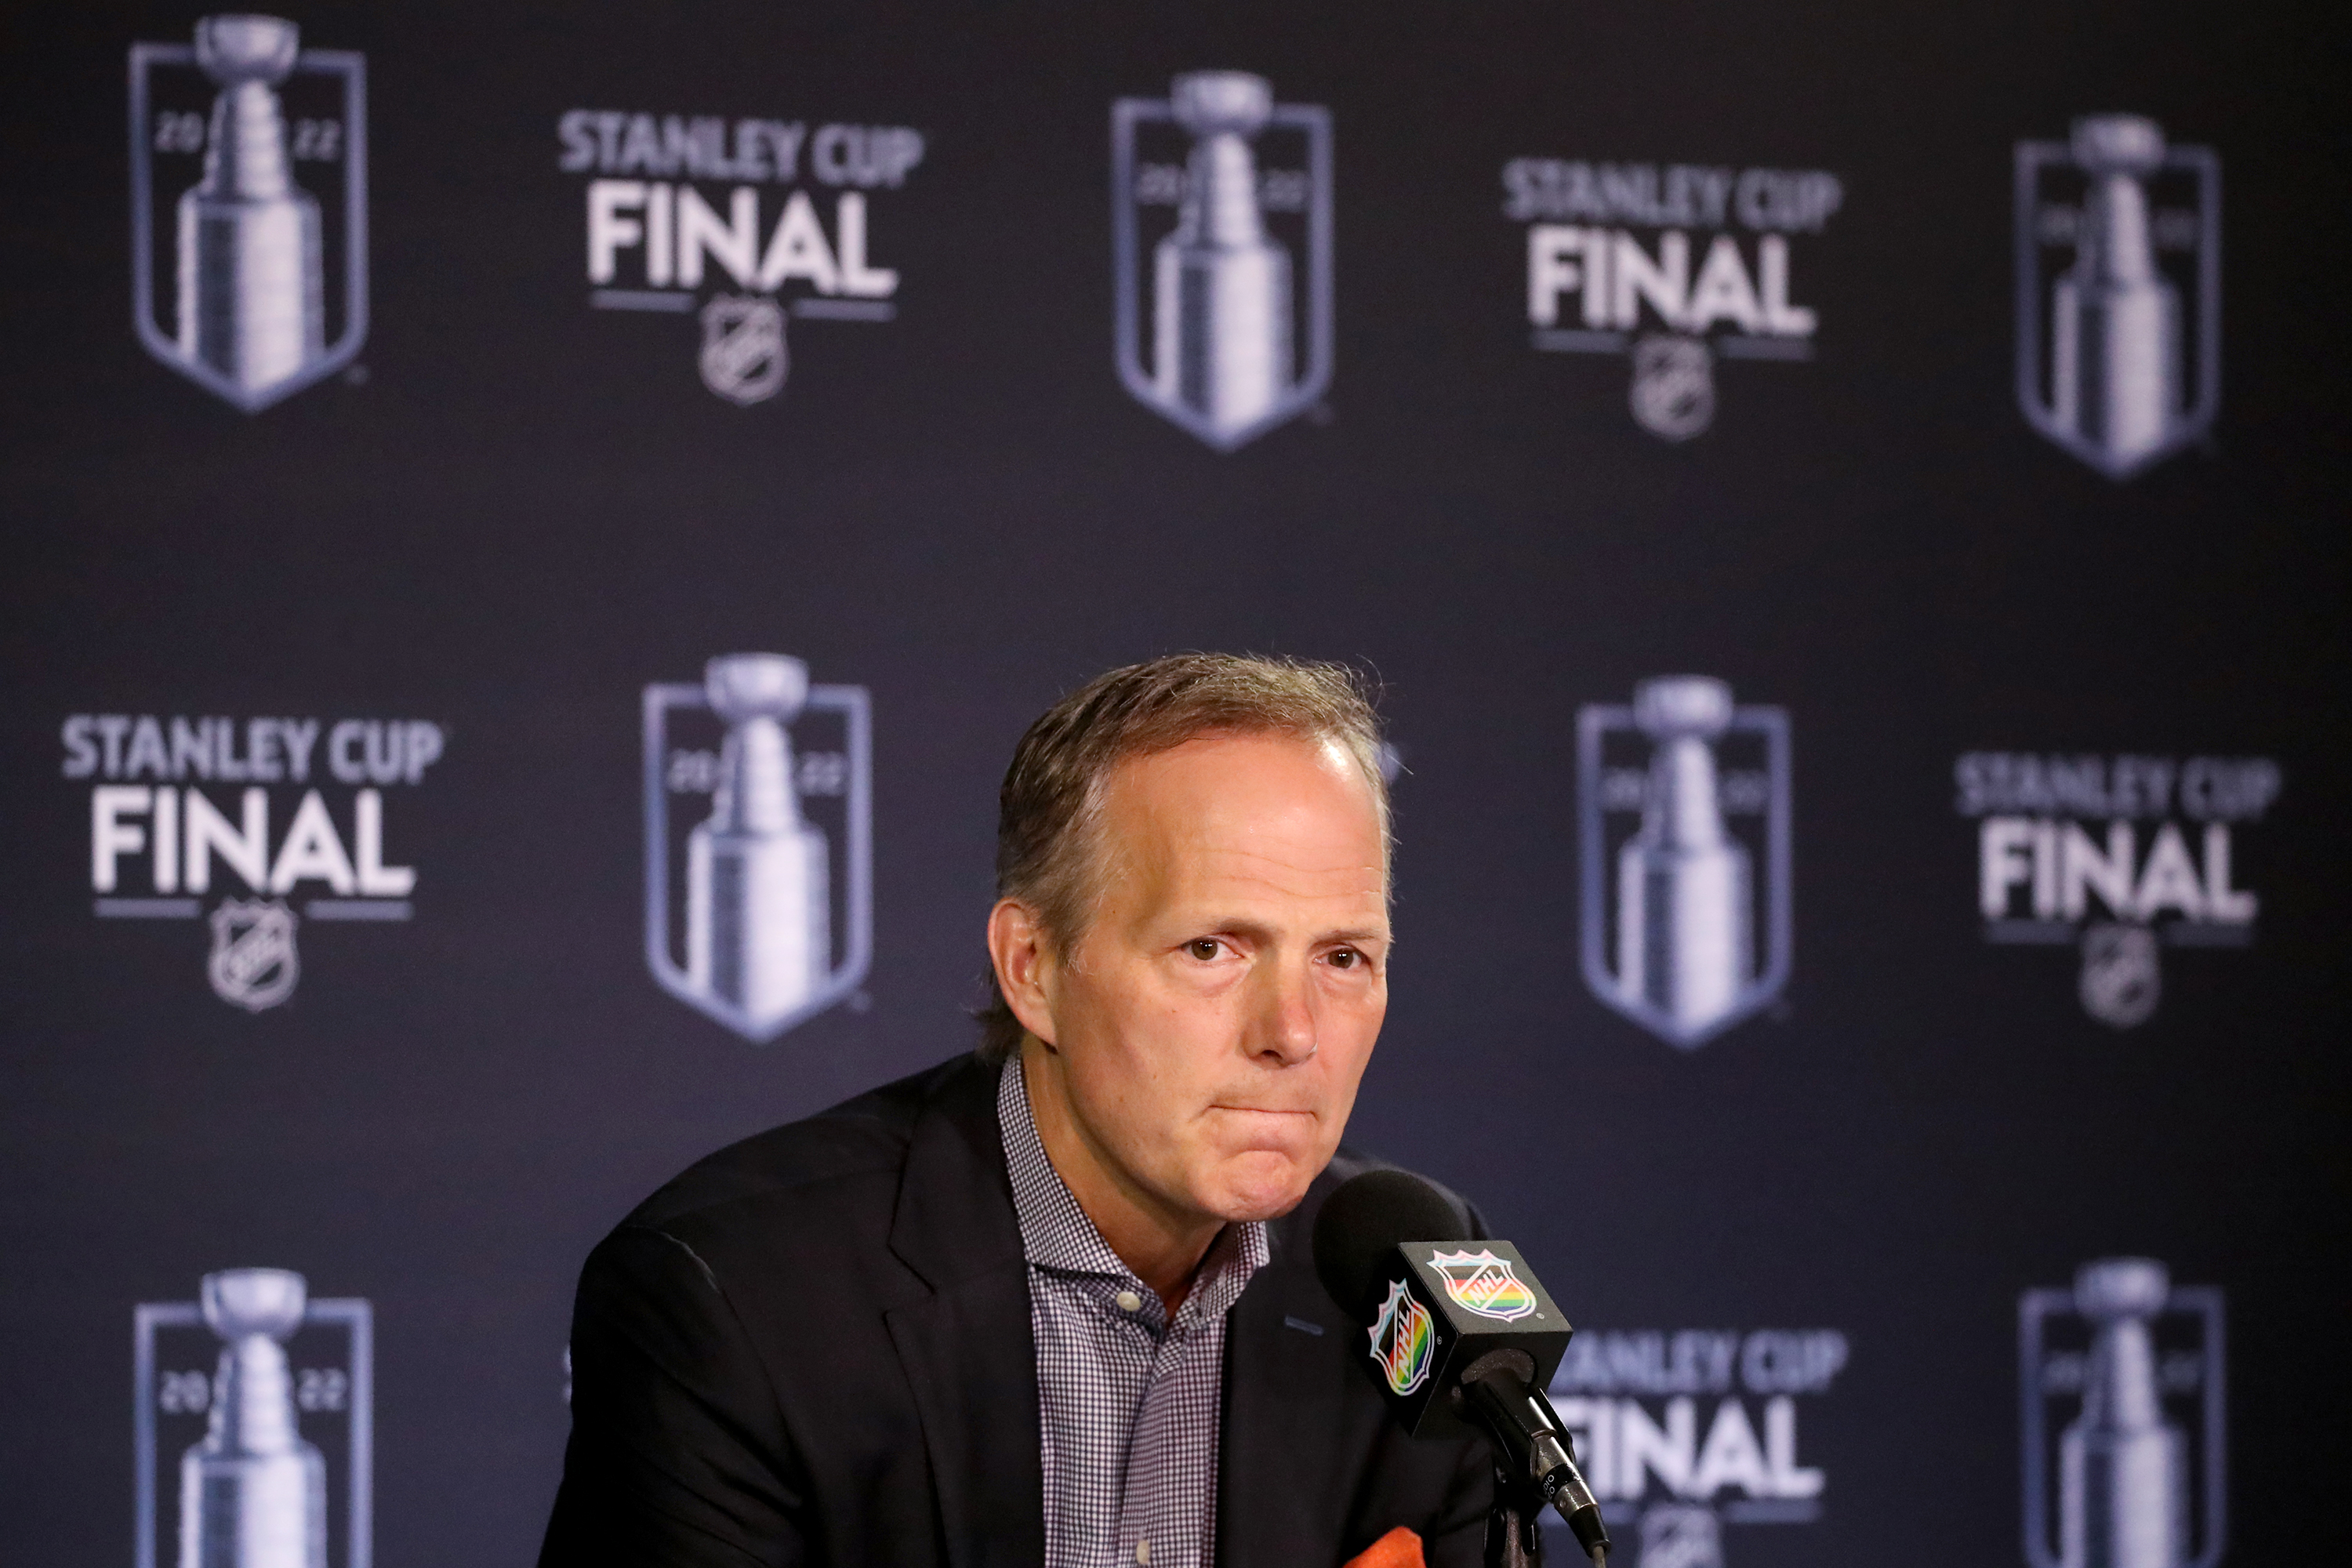 Prince George's Jon Cooper wins first career Stanley Cup with